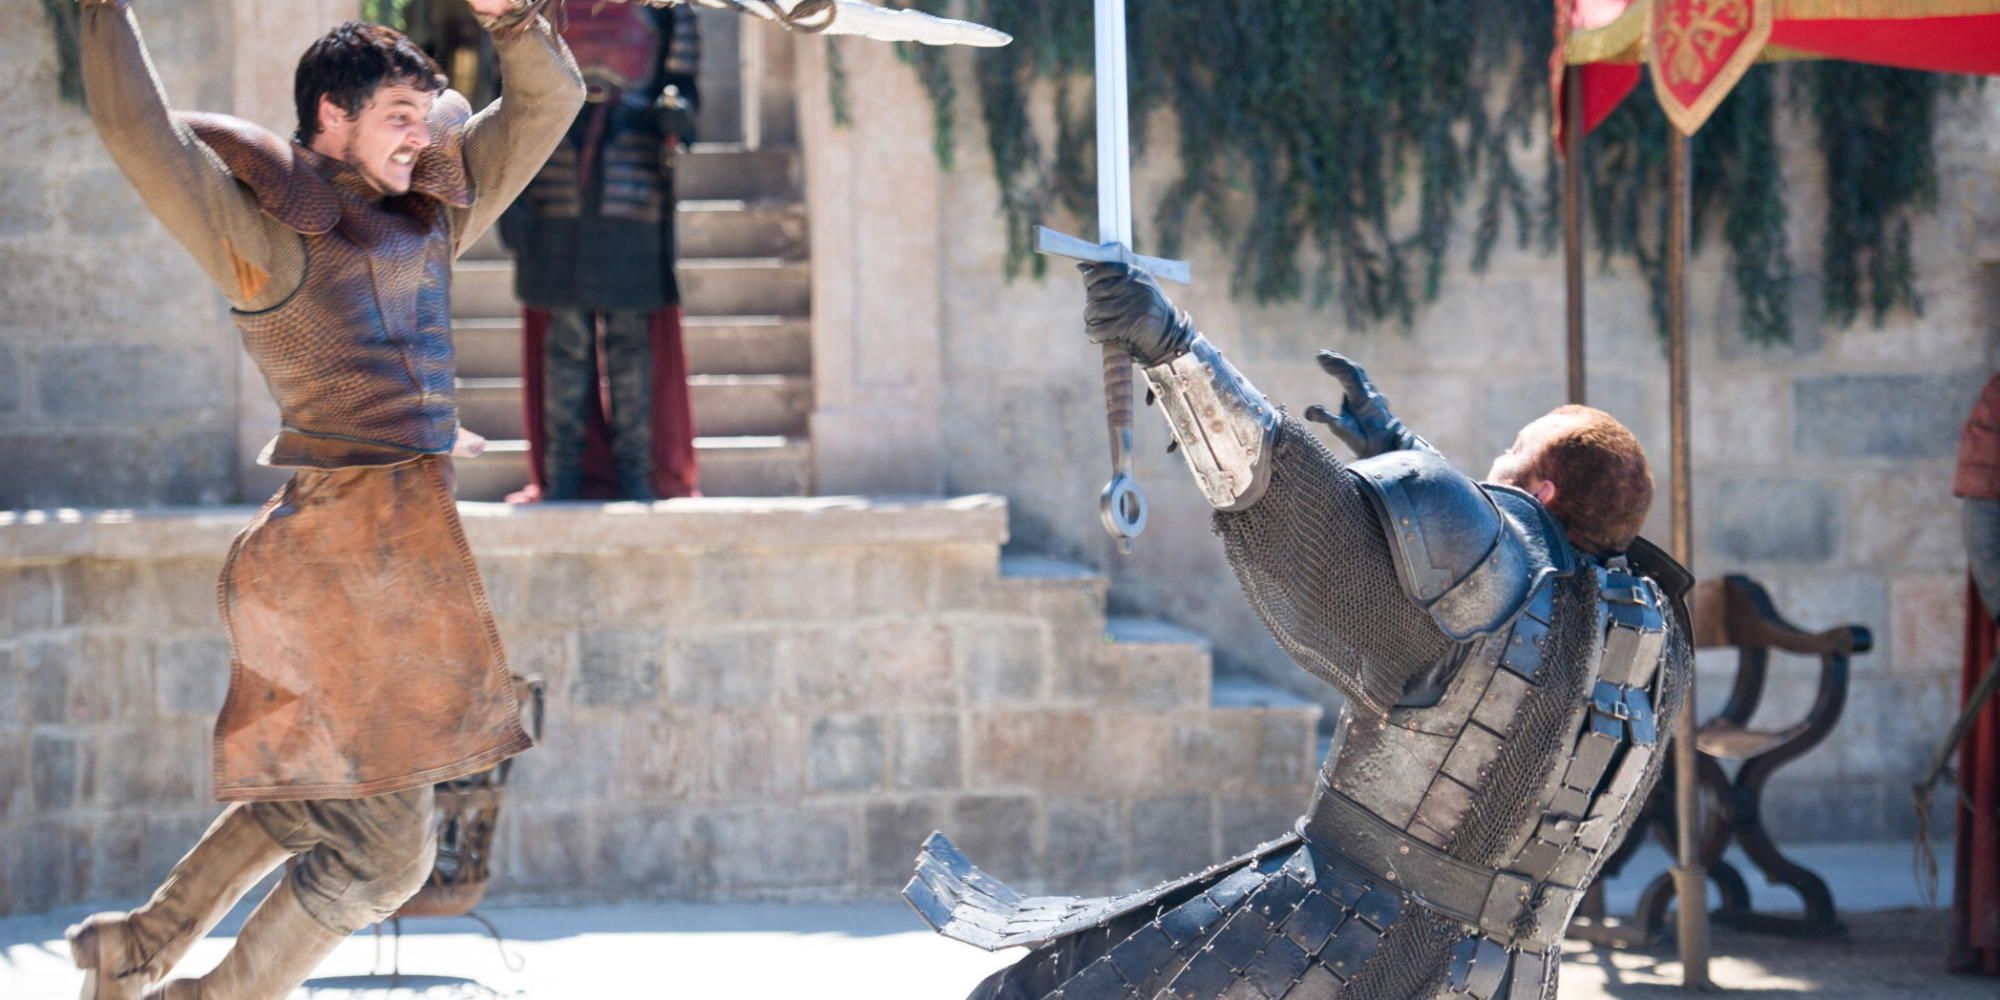 The Viper fights the Mountain in GOT